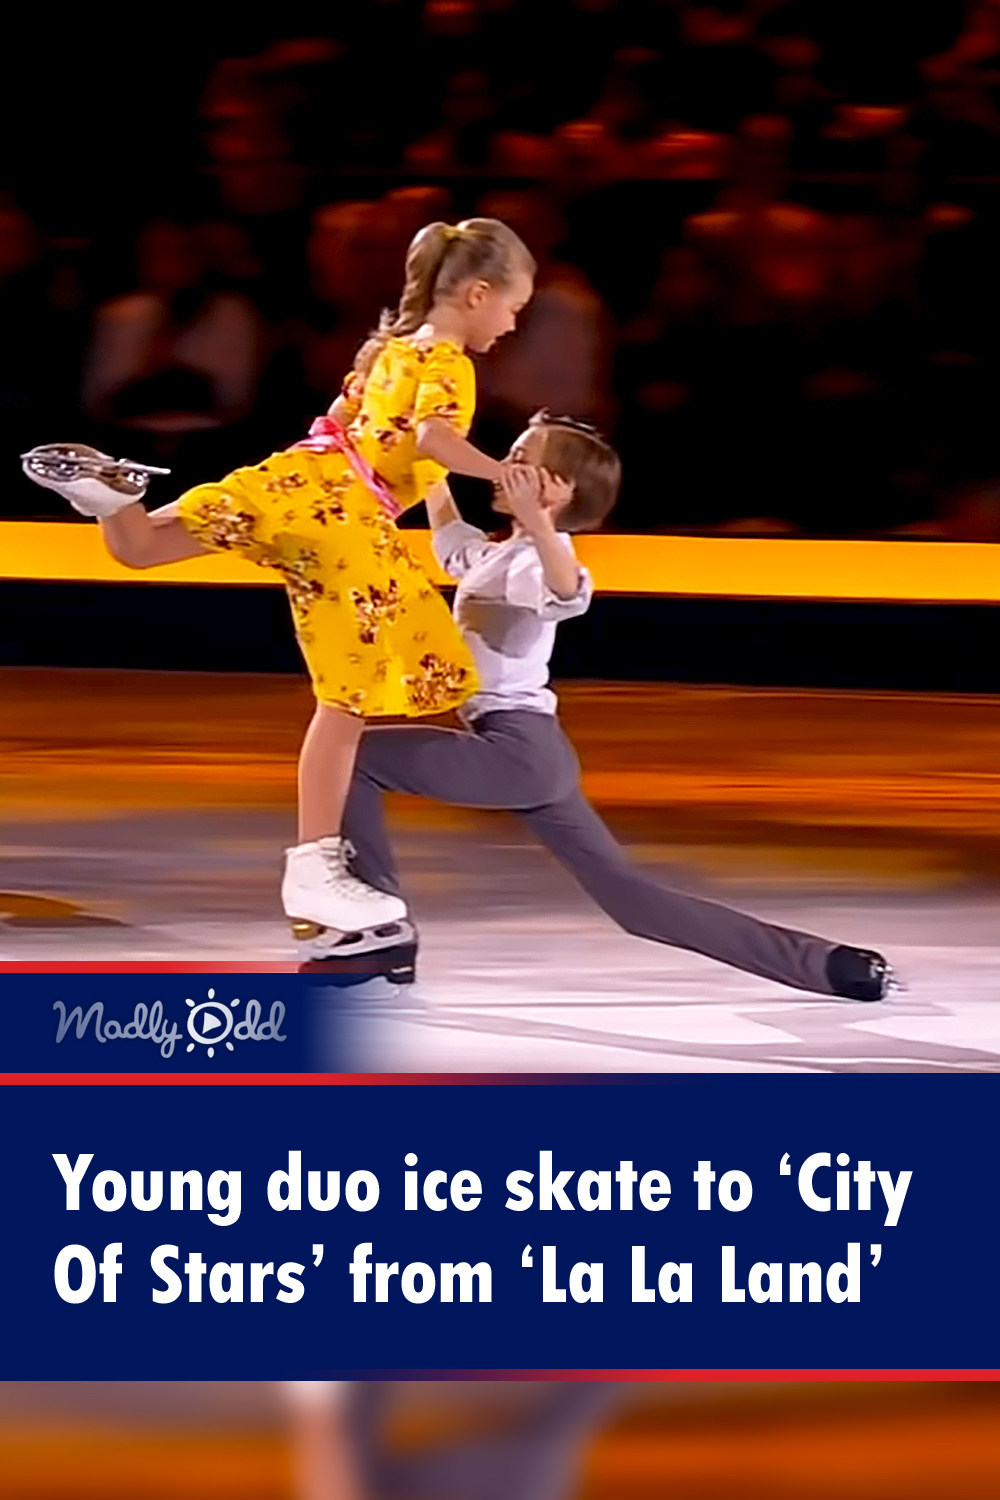 Young duo ice skate to ‘City Of Stars’ from ‘La La Land’